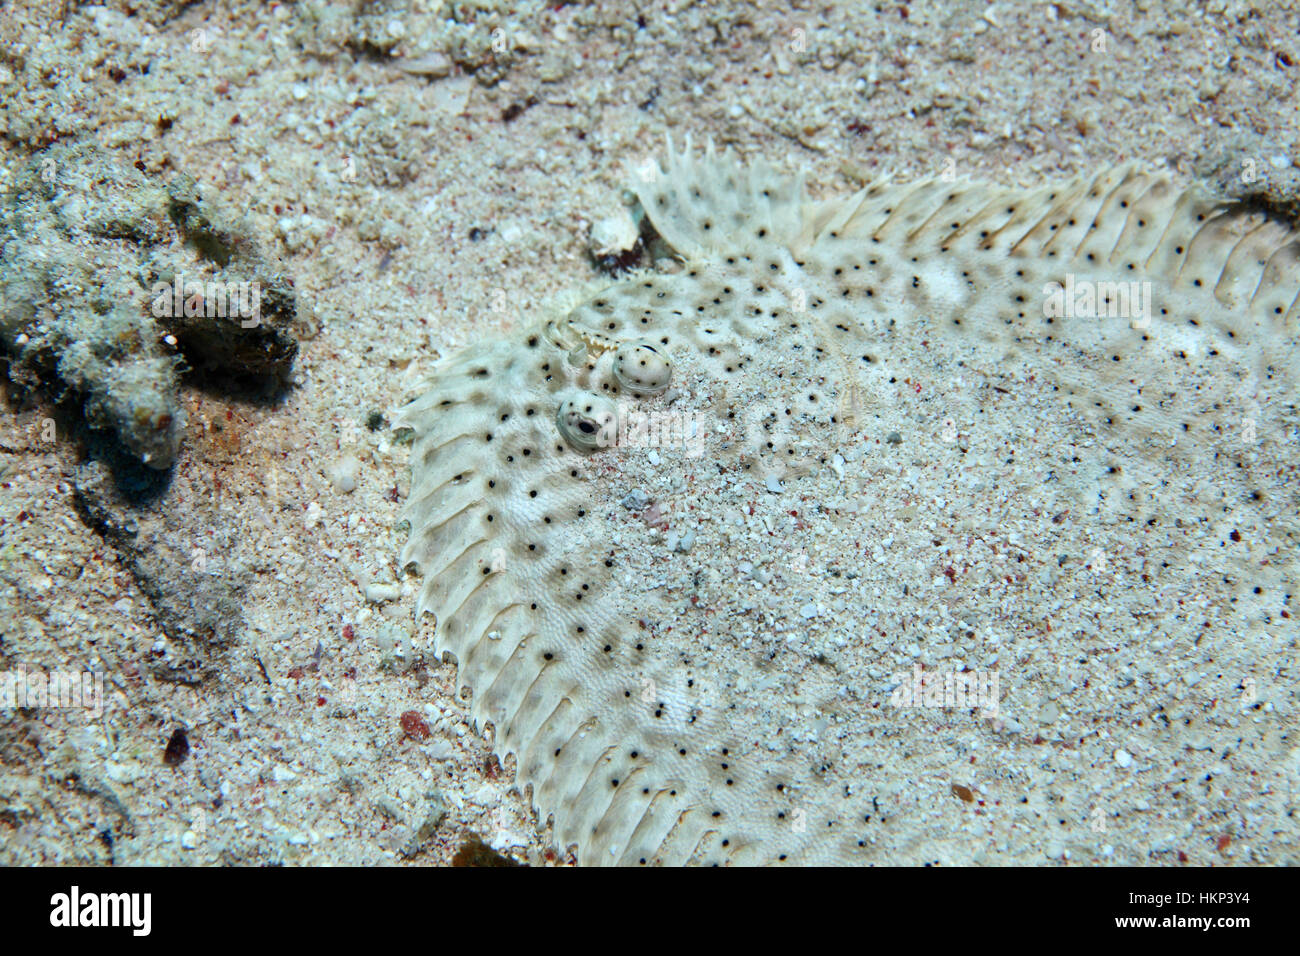 Moses sole fish (Pardachirus marmoratus) camouflaged underwater on sandy bottom of the Red Sea Stock Photo